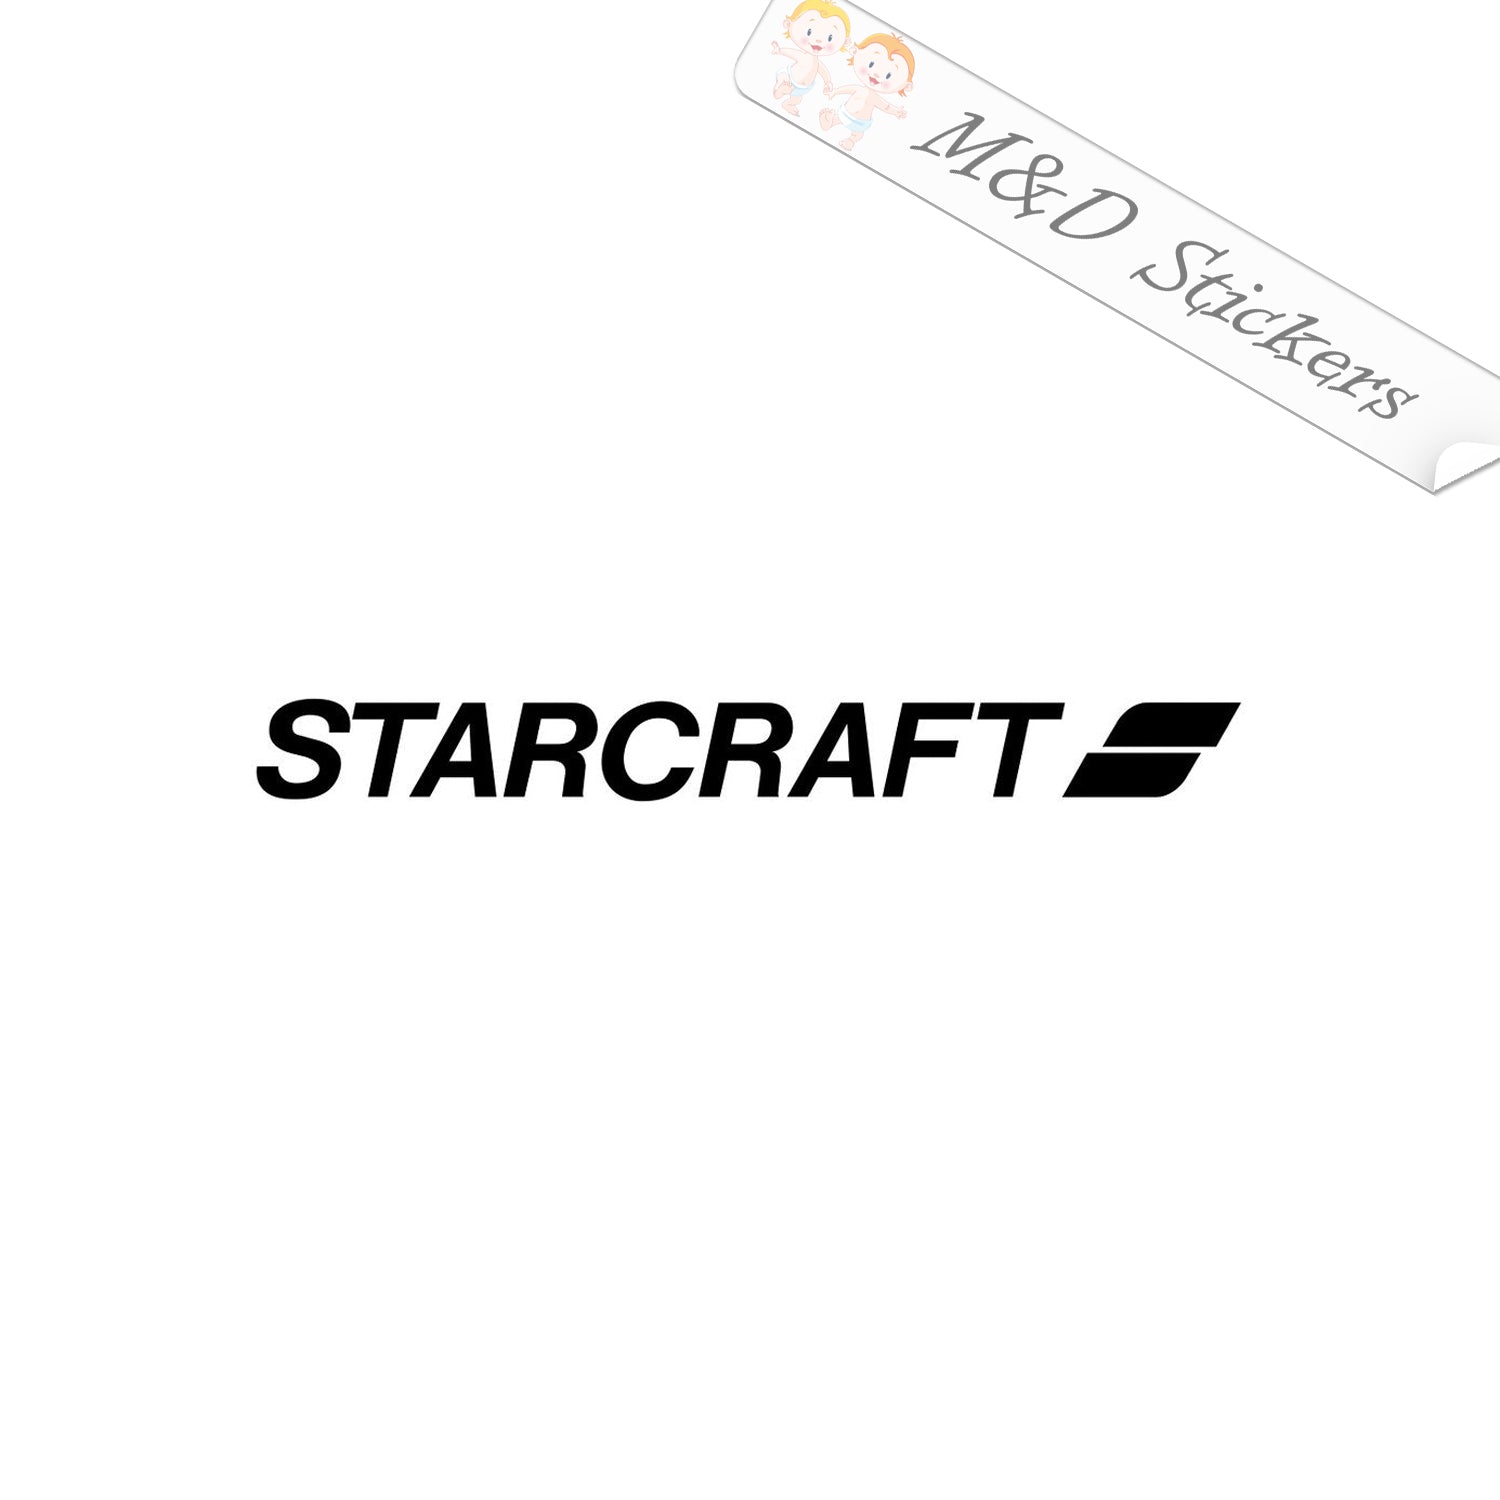 StarCraft Vinyl - This morning we added the color chart for